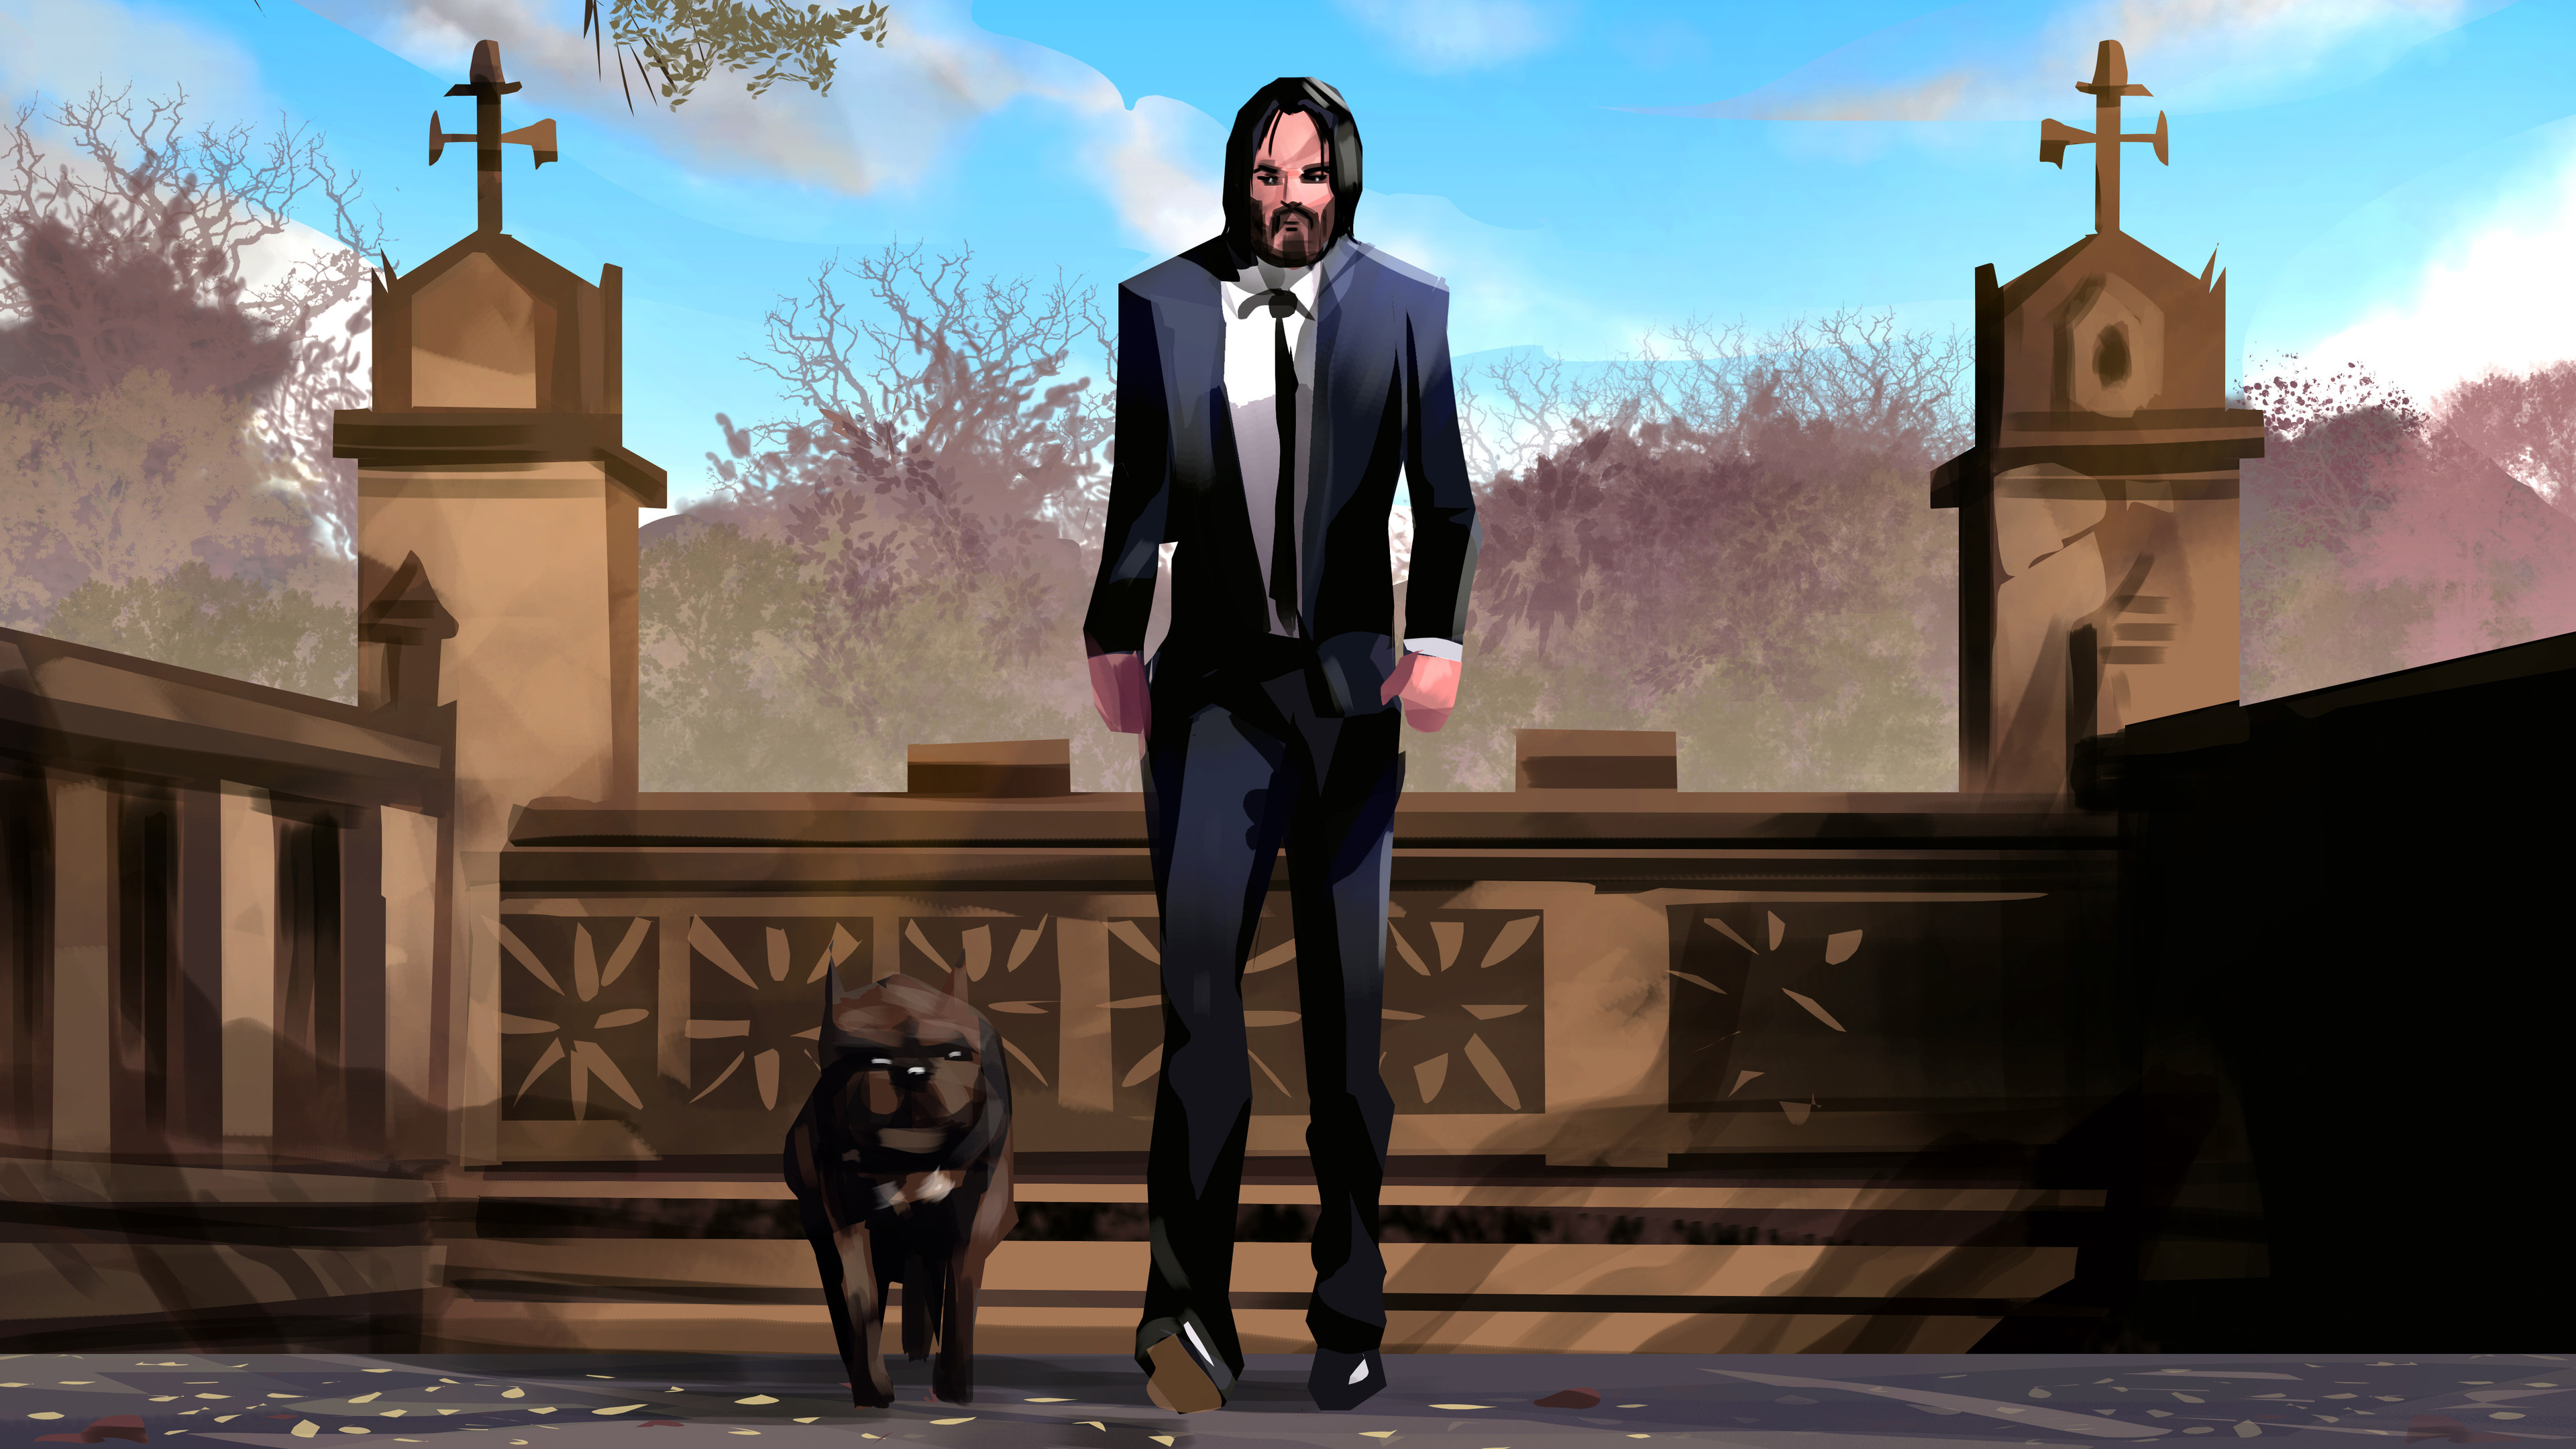 What if...John Wick was an anime? : r/midjourney